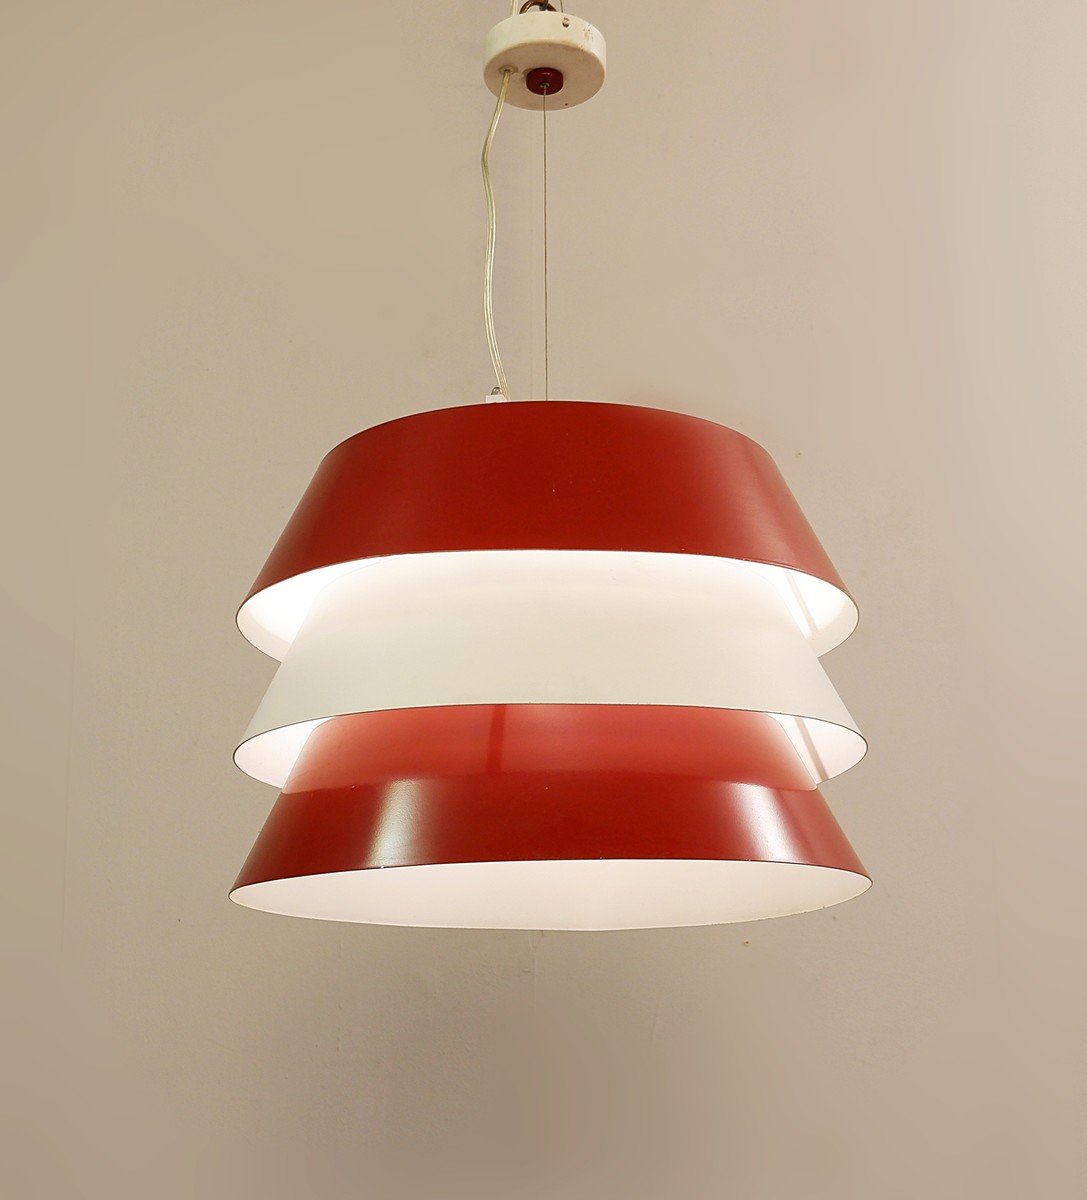 Italian Pendant Light In Red And White Metal - 1960s